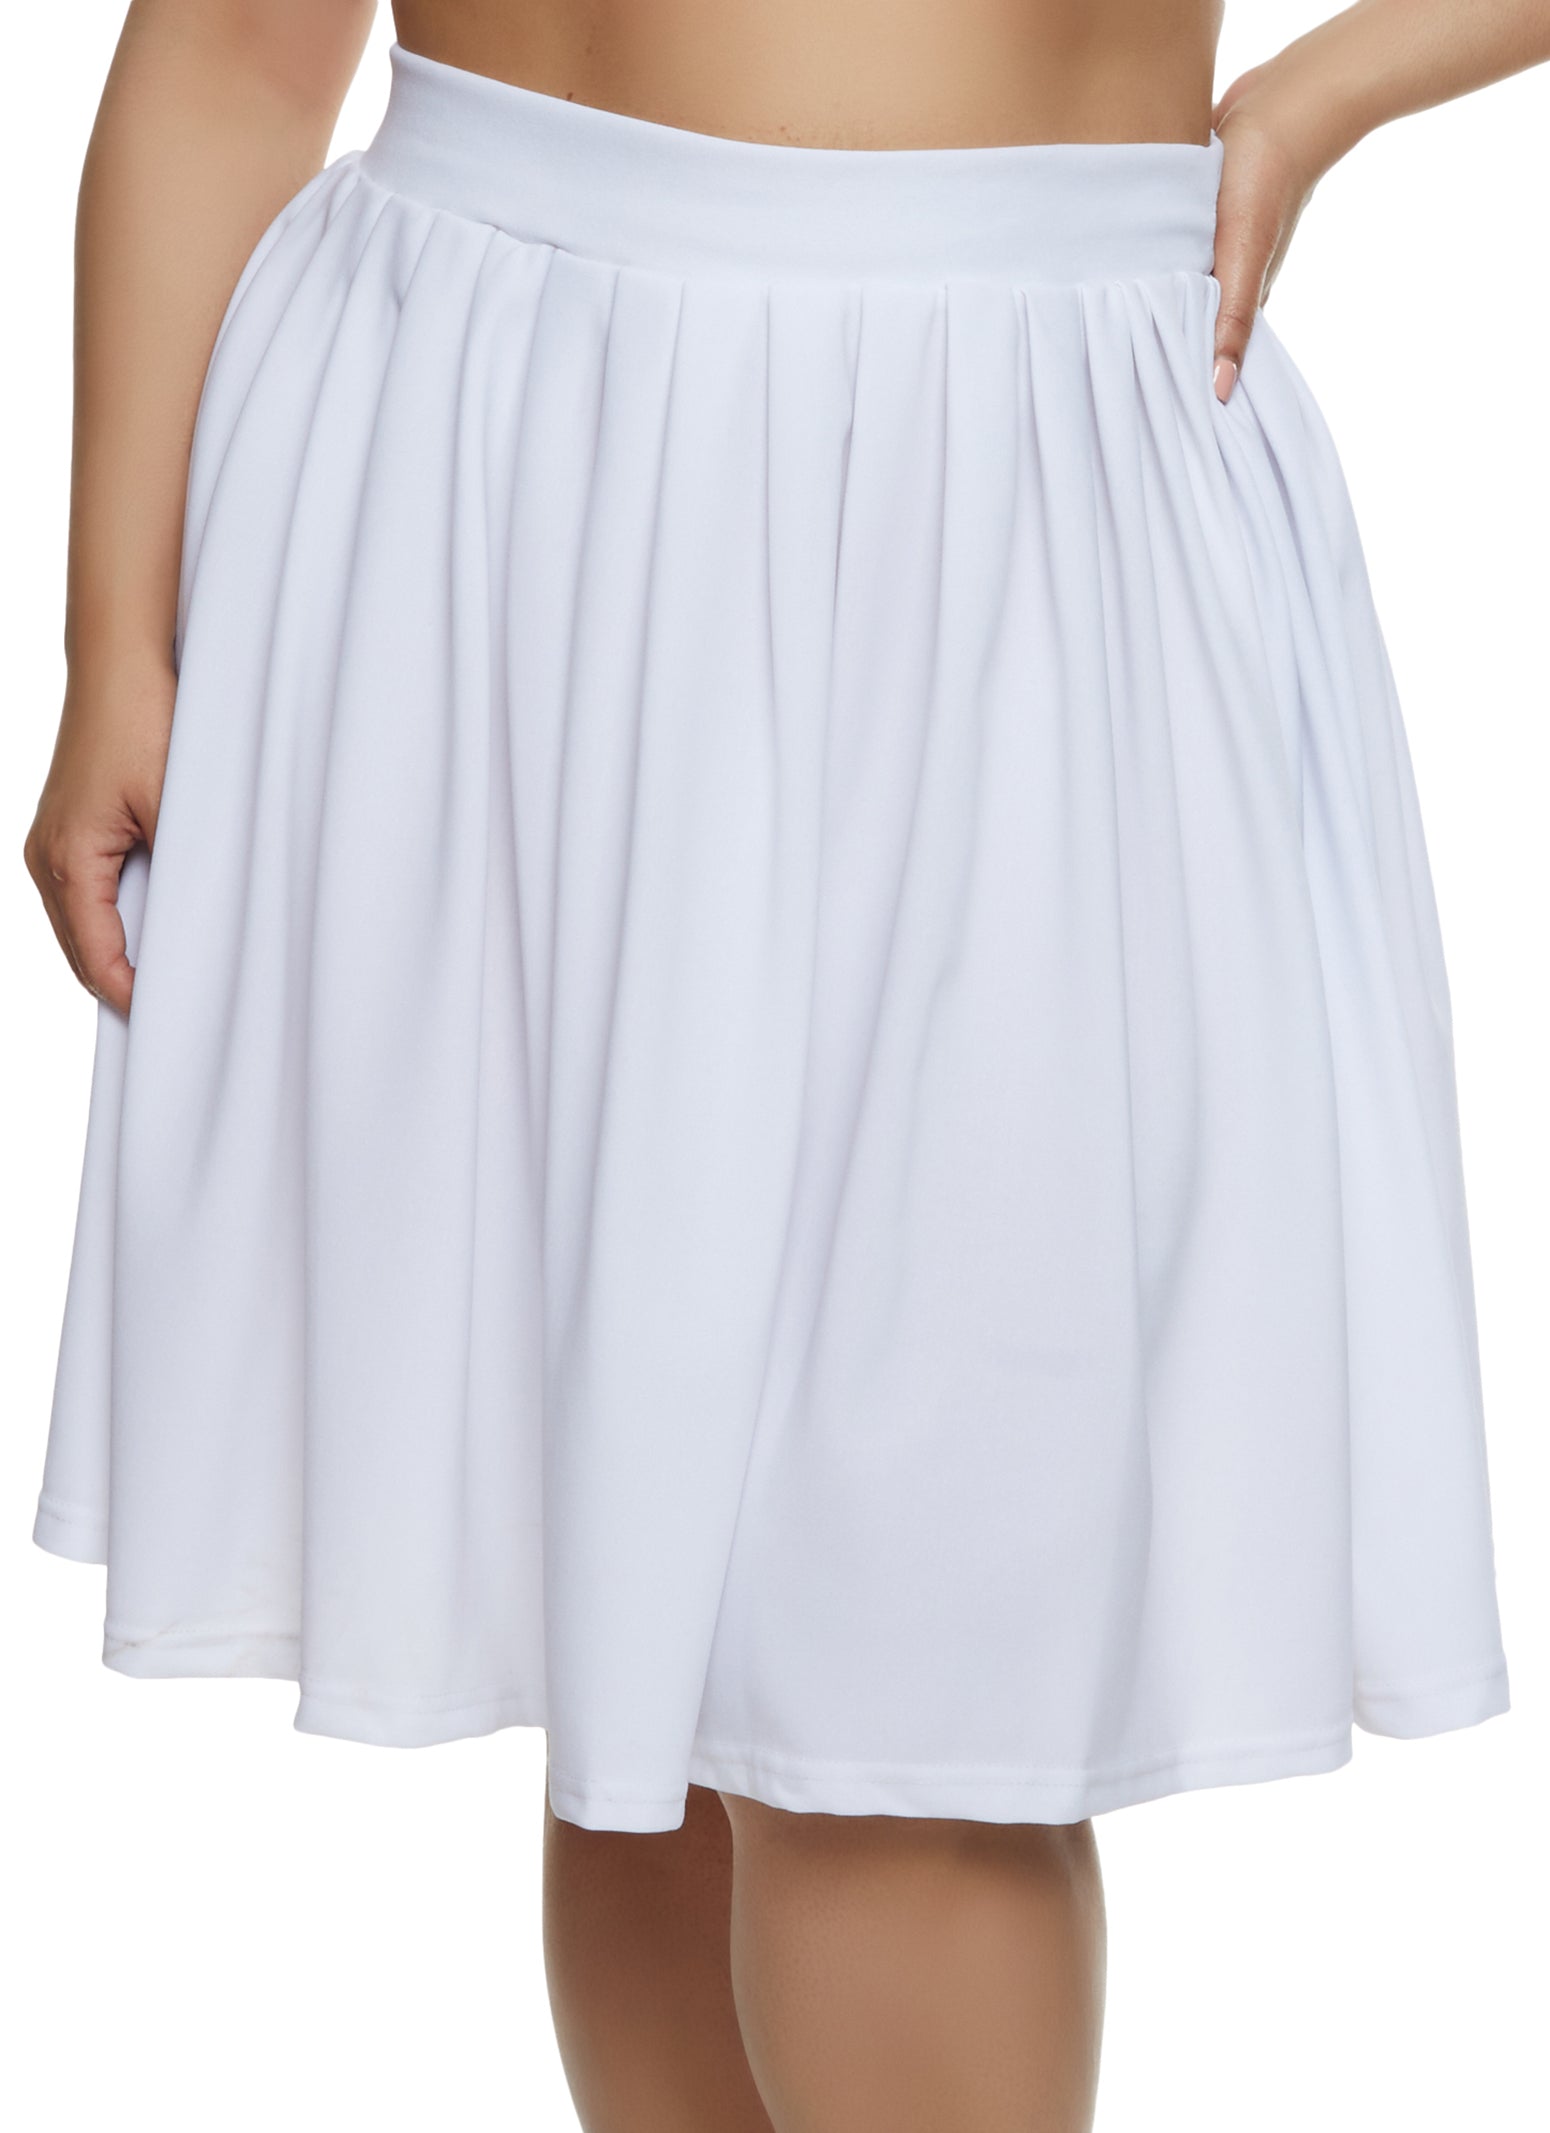 Distill vin opladning Plus Size Solid Pleated Skater Skirt - White